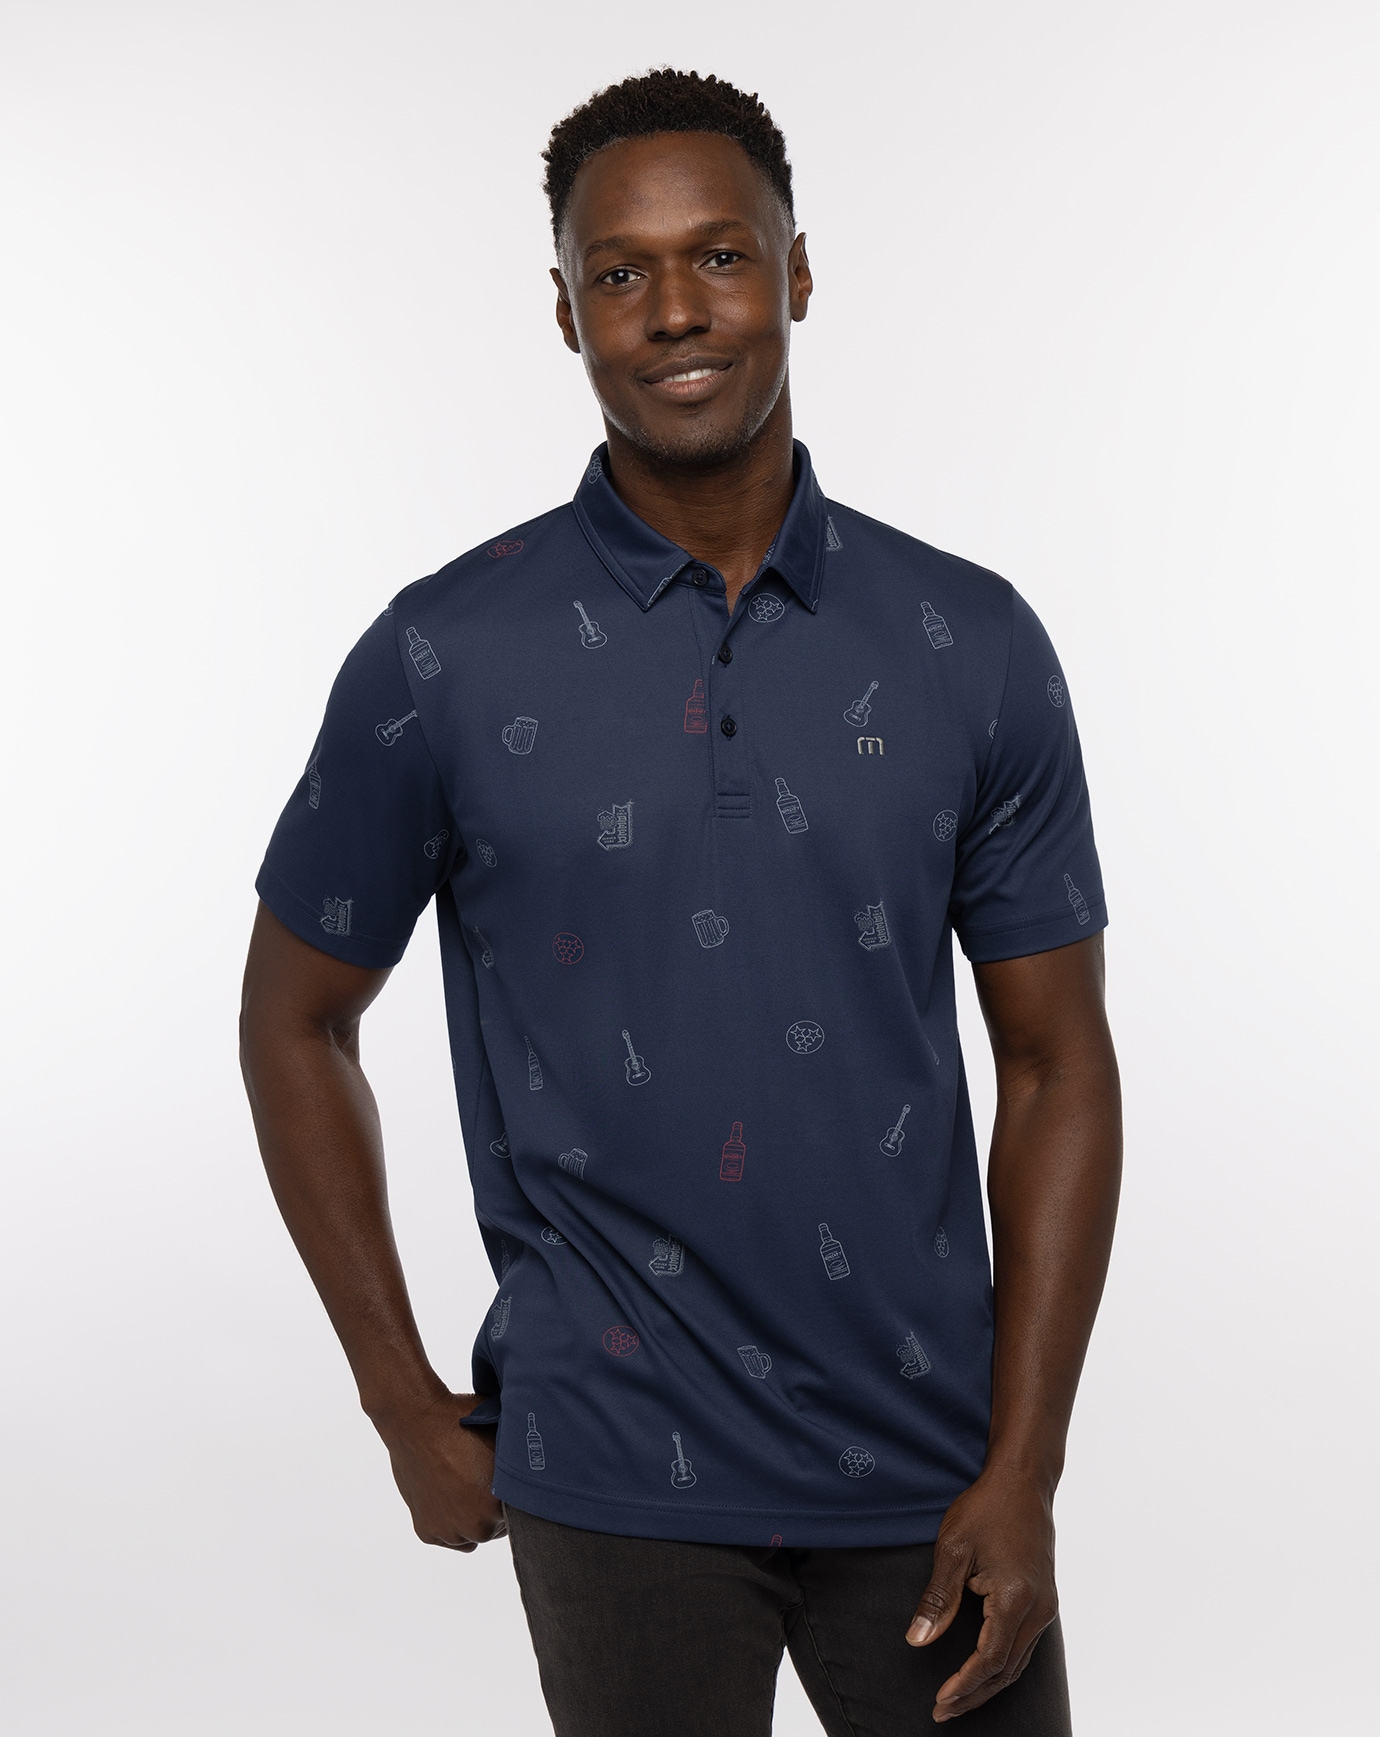 Related Product - STOCK THE COOLER POLO